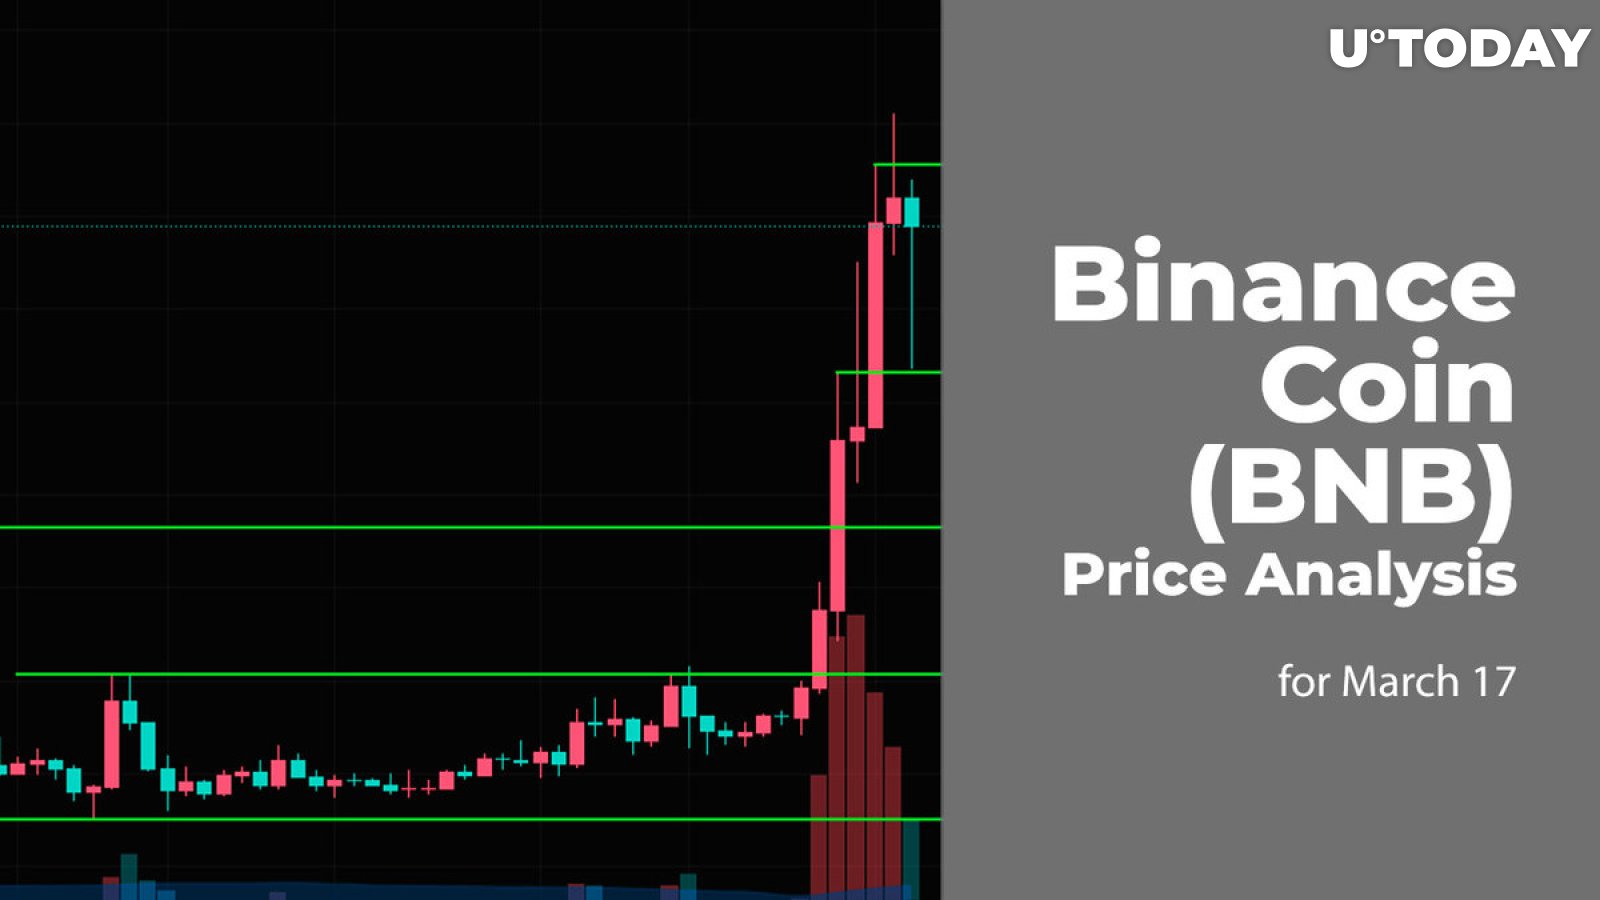 Binance Coin (BNB) Price Prediction for March 17